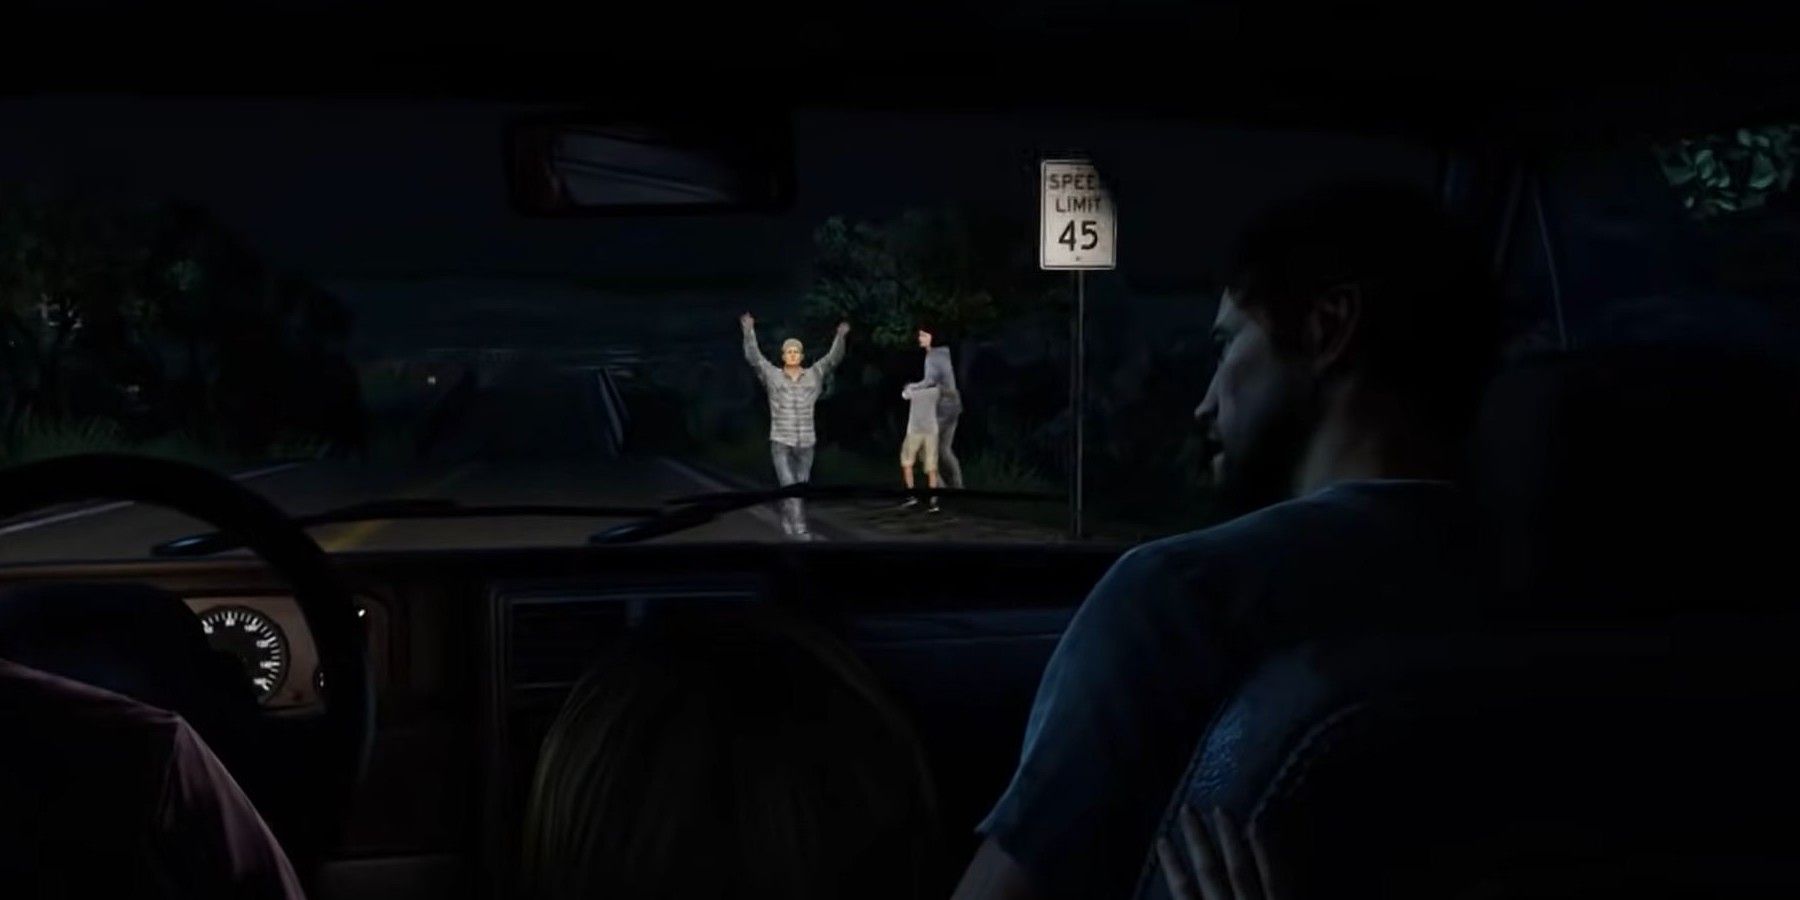 TLOU Intro Foreshadows The Game's Ending (& We All Missed It)